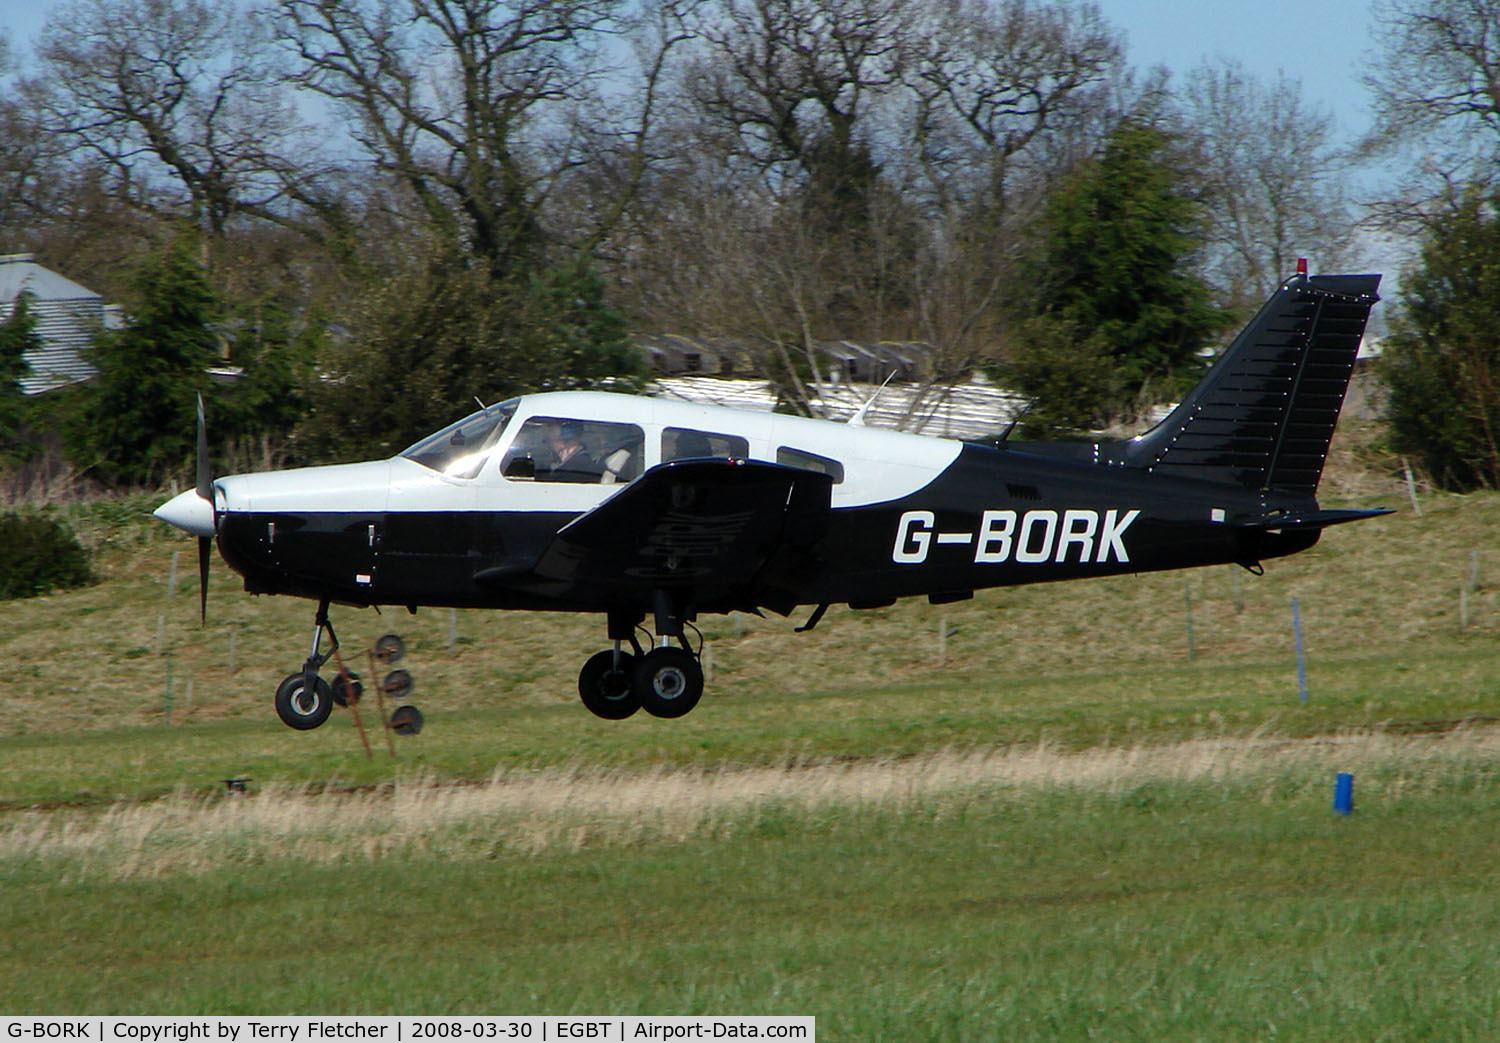 G-BORK, 1981 Piper PA-28-161 Cherokee Warrior II C/N 28-8116095, The Buckinghamshire airfield at Turweston always has a good variety of aircraft movements